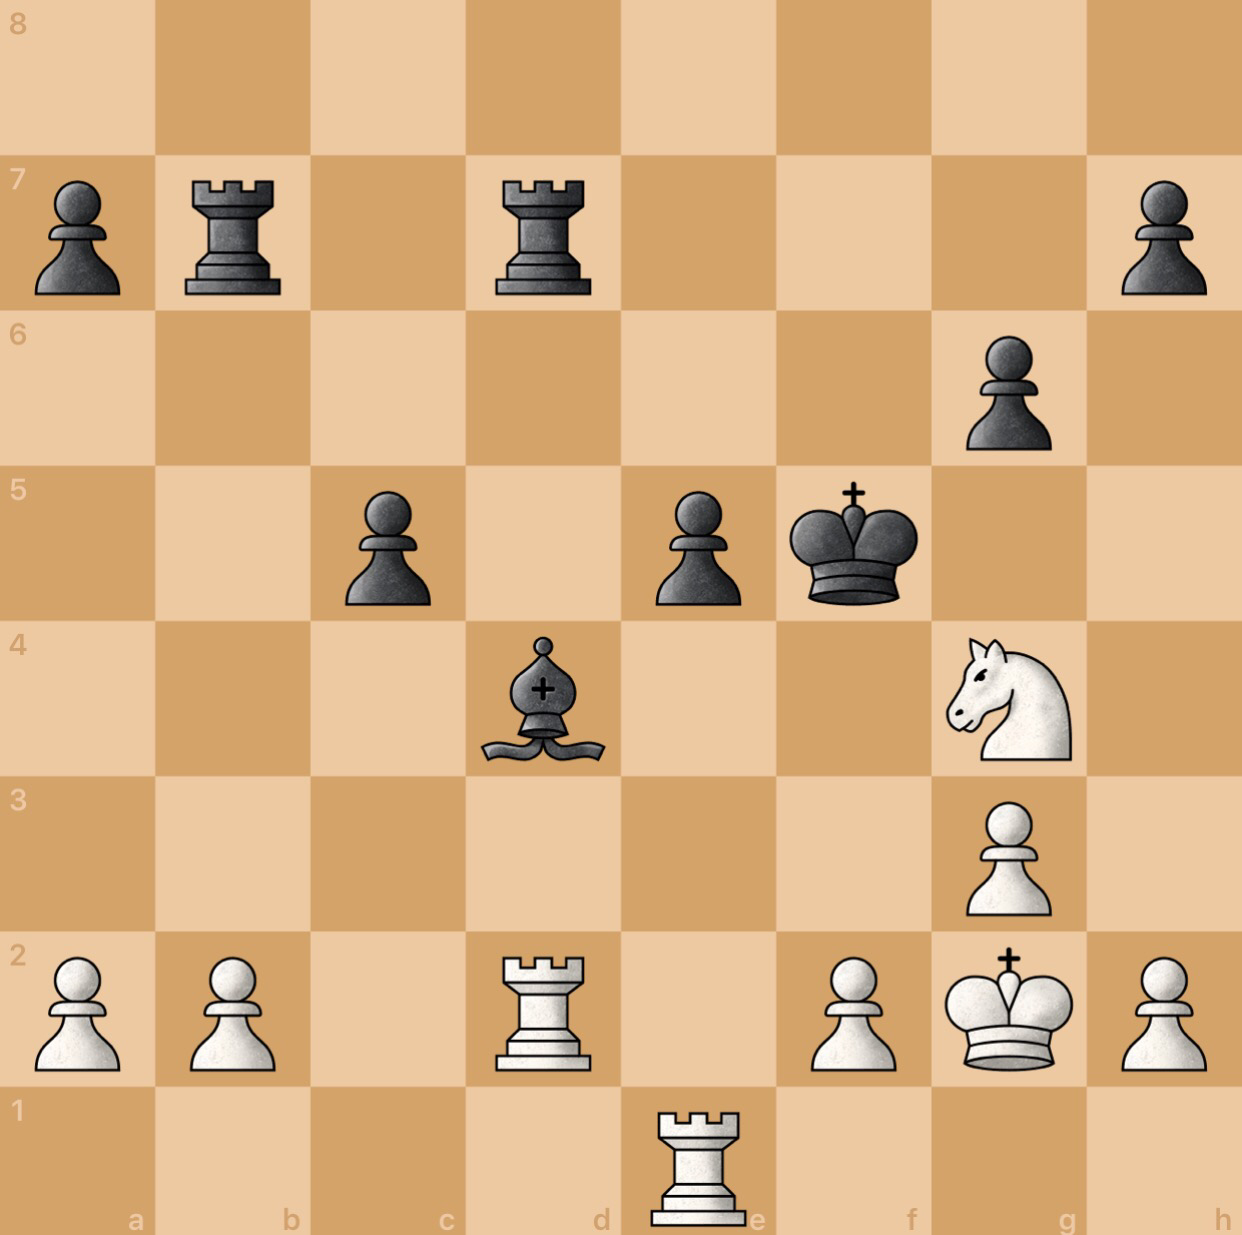 That was one tricky puzzle – ChessHive